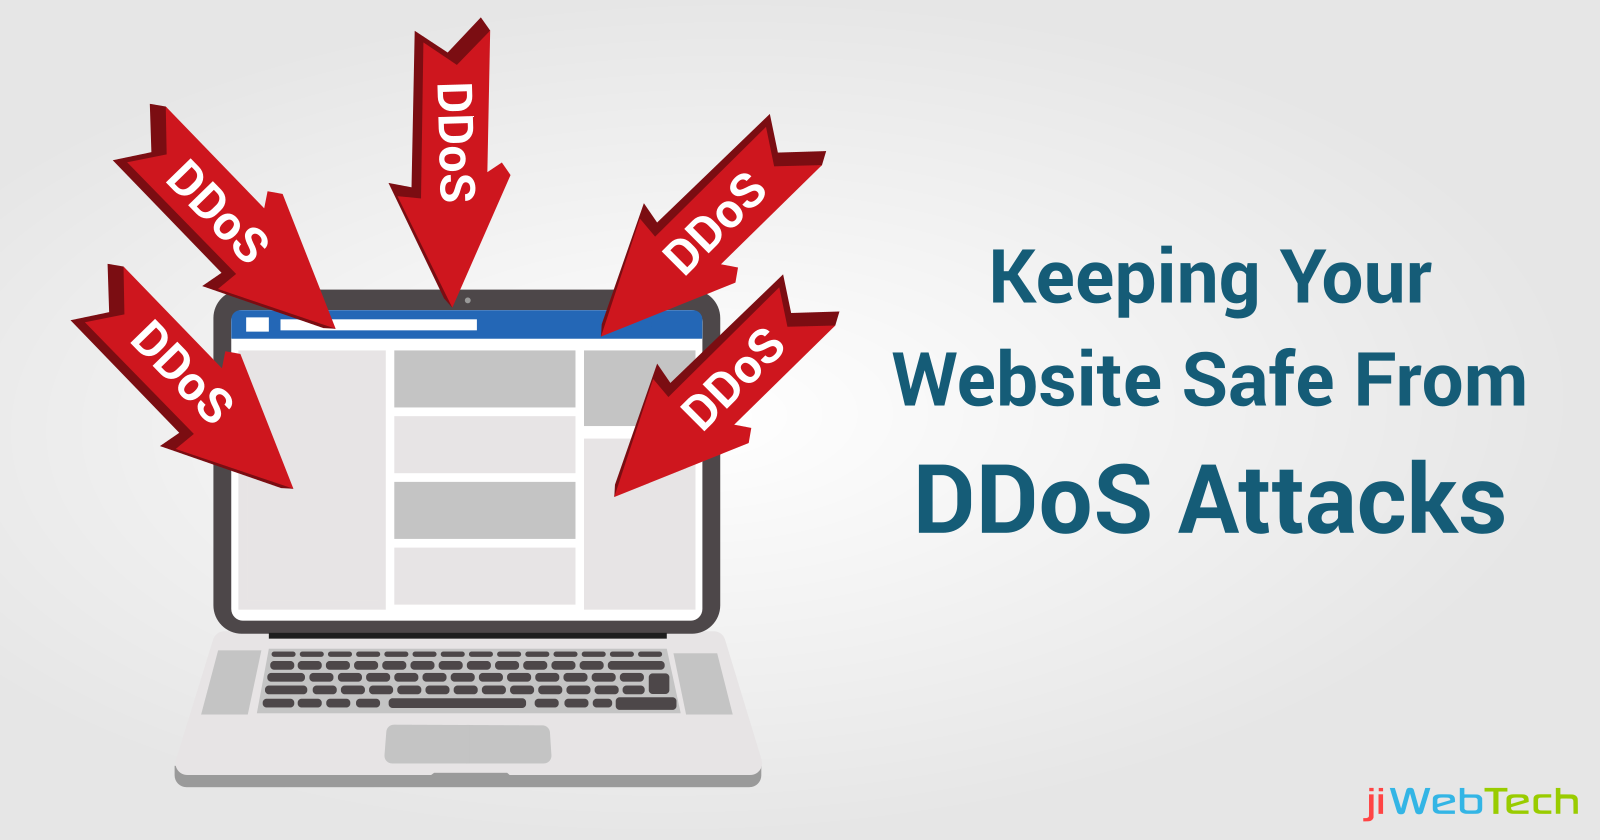 How to Prevent DDoS Attacks: Tips to Keep Your Website Safe